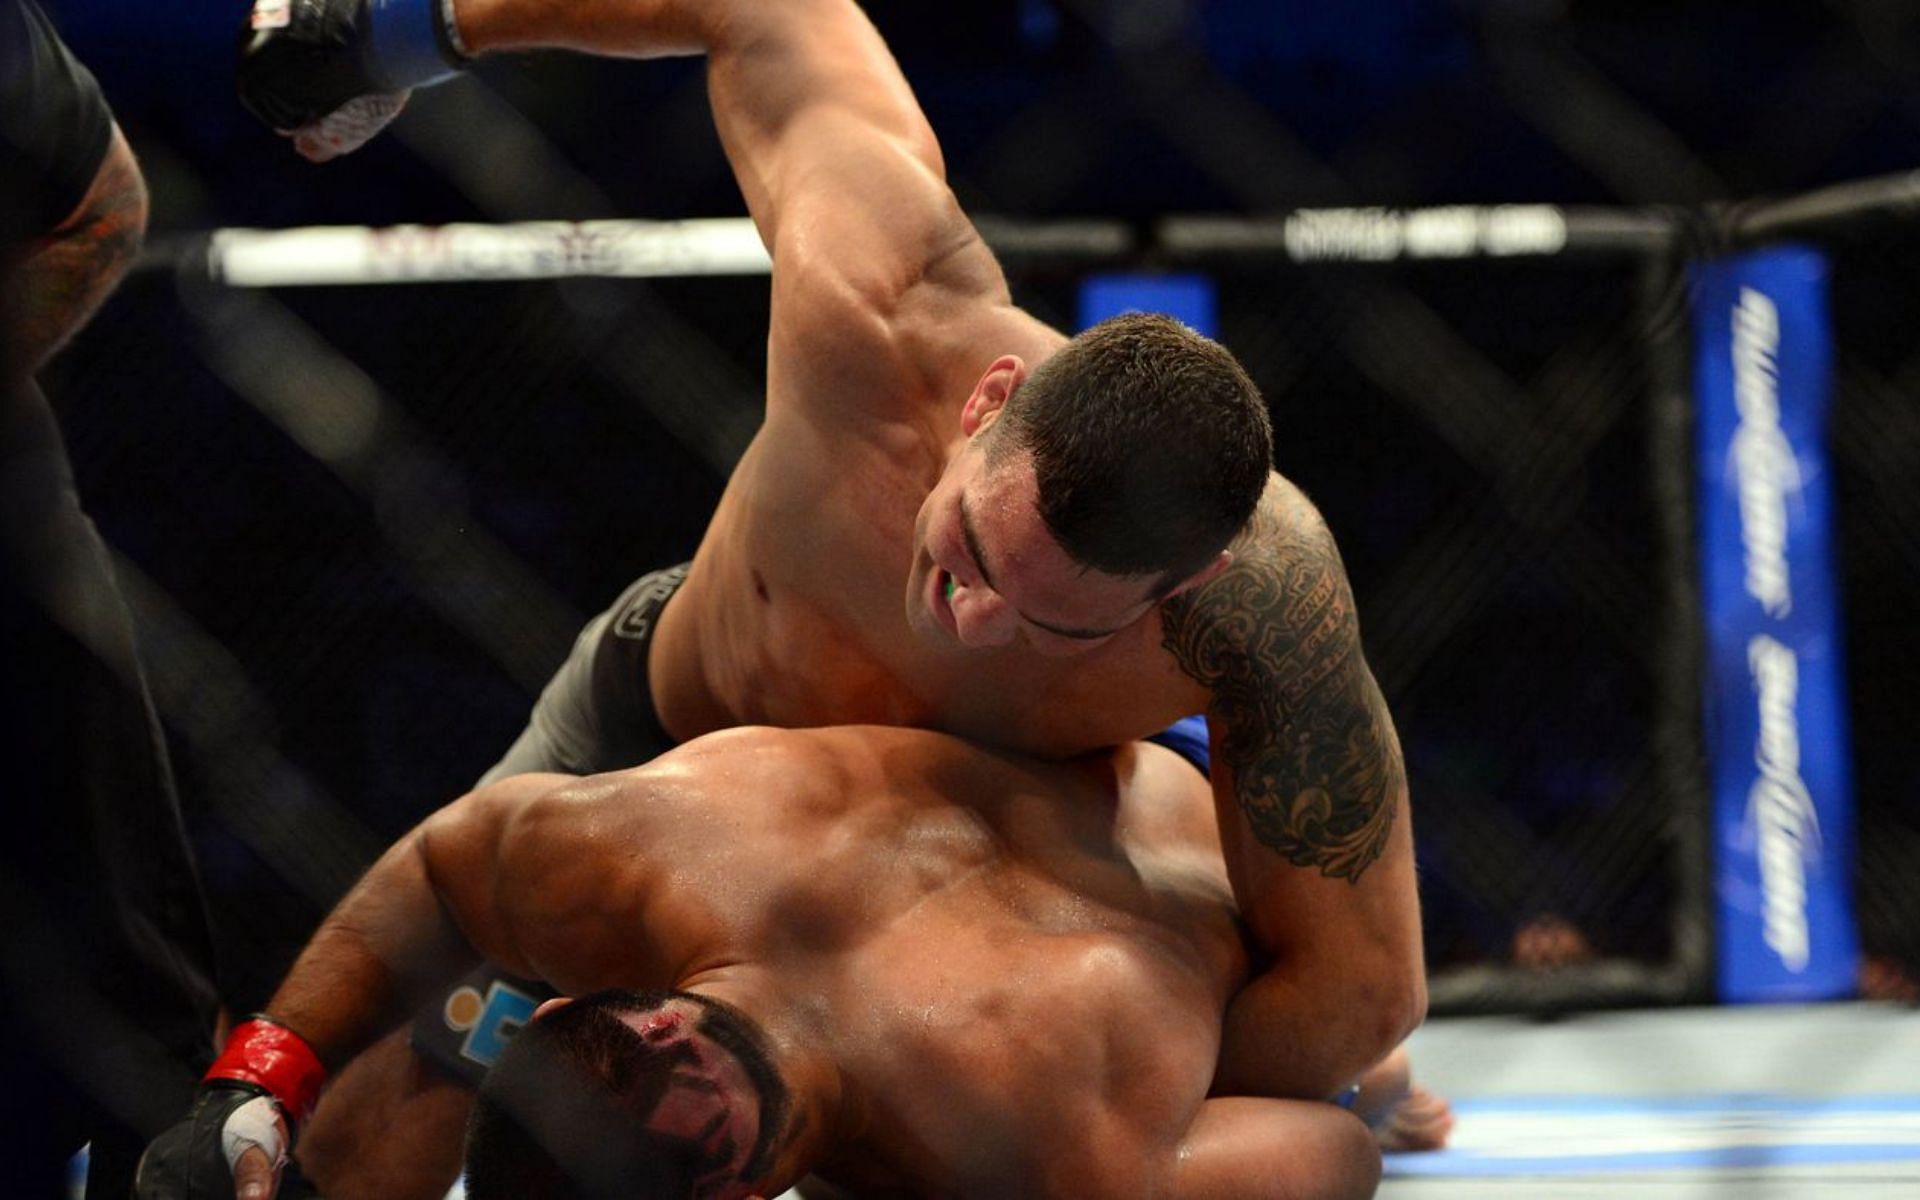 Chris Weidman used a devastating standing elbow to finish off Mark Munoz in 2012